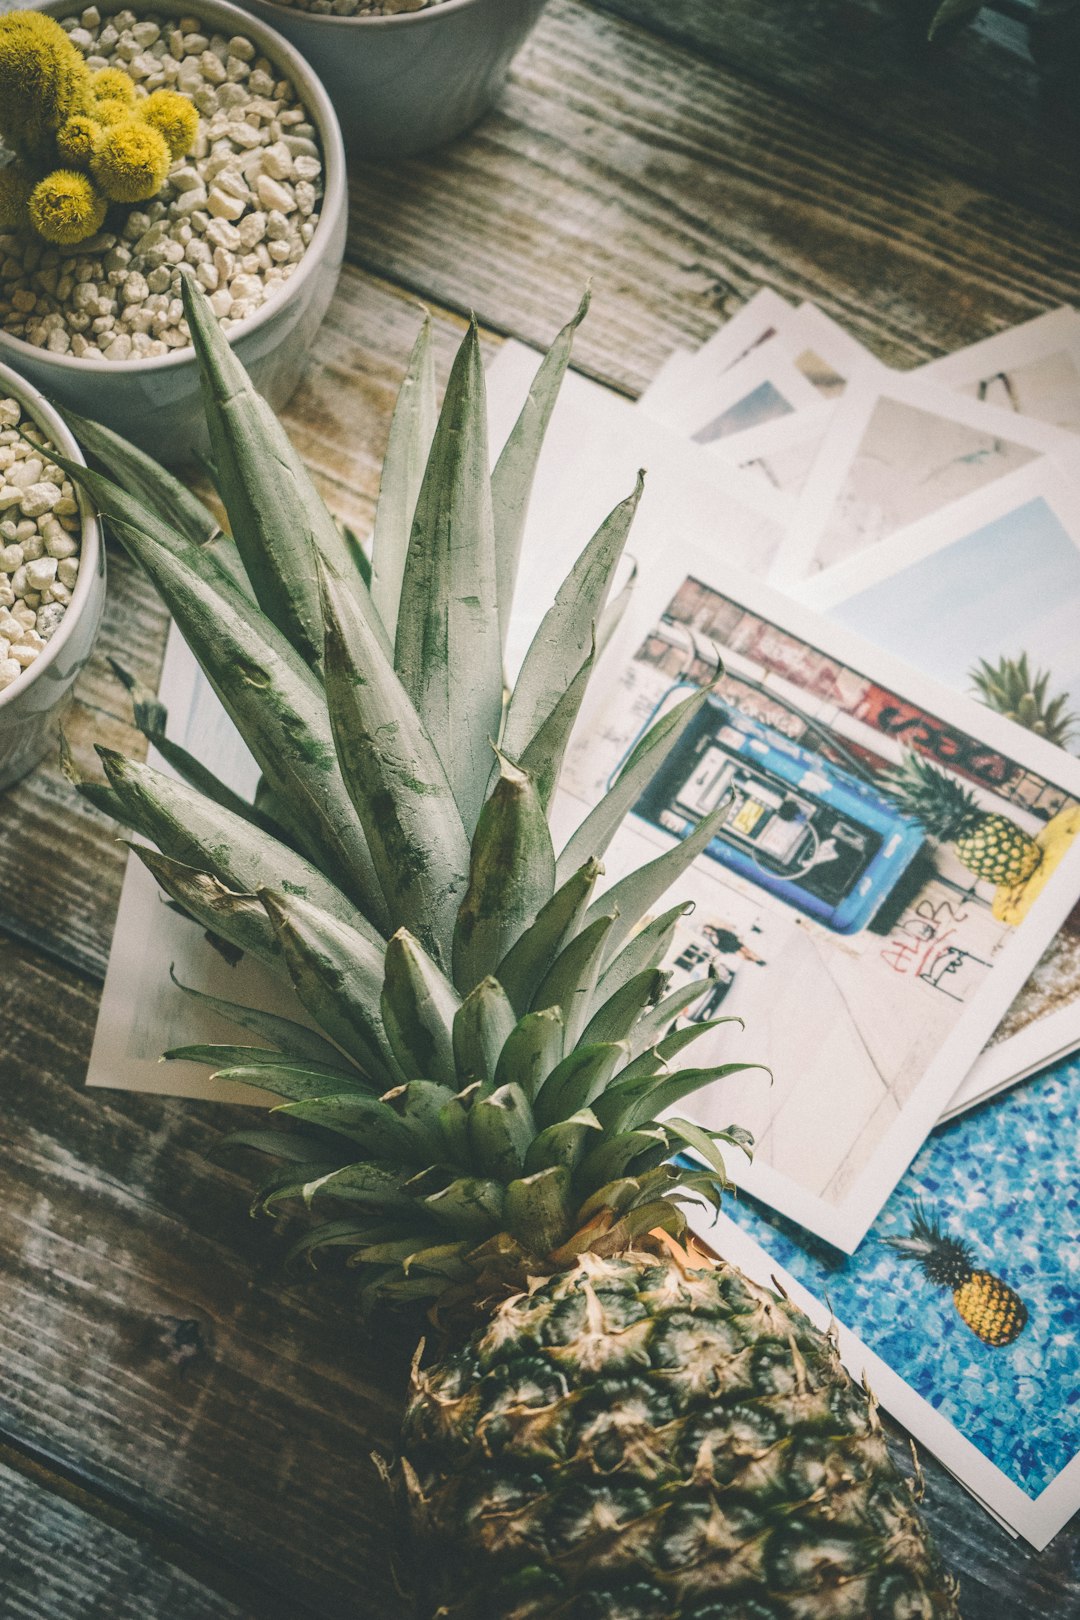 Pineapple Photo and Pineapple Prints on workspace